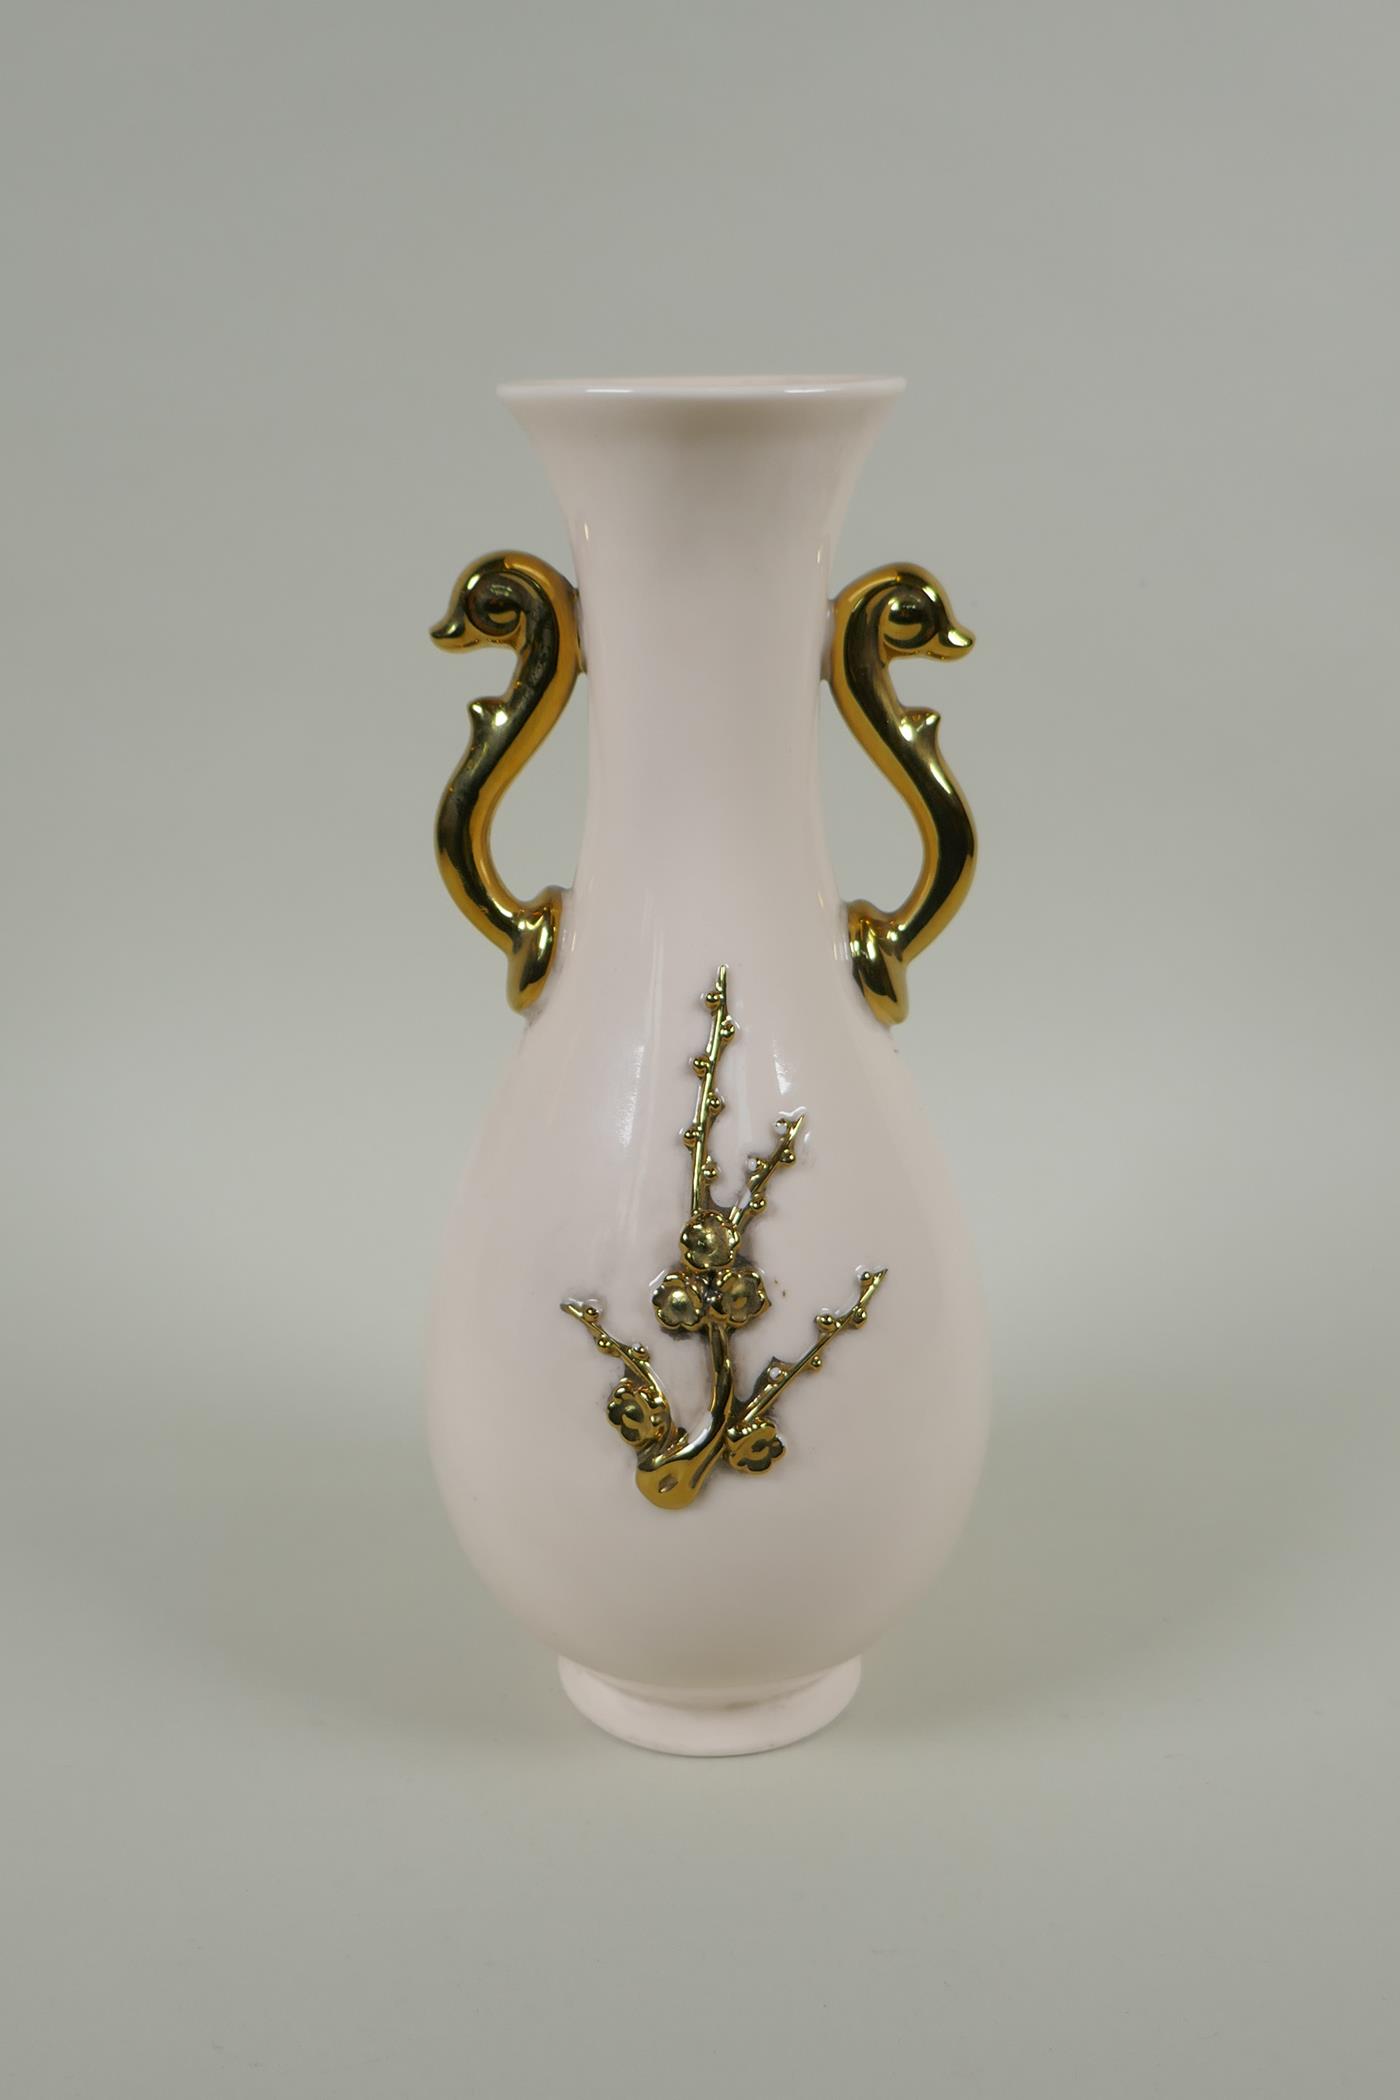 A Chinese cream glazed porcelain pear shaped vase with two gilt handles and raised prunus